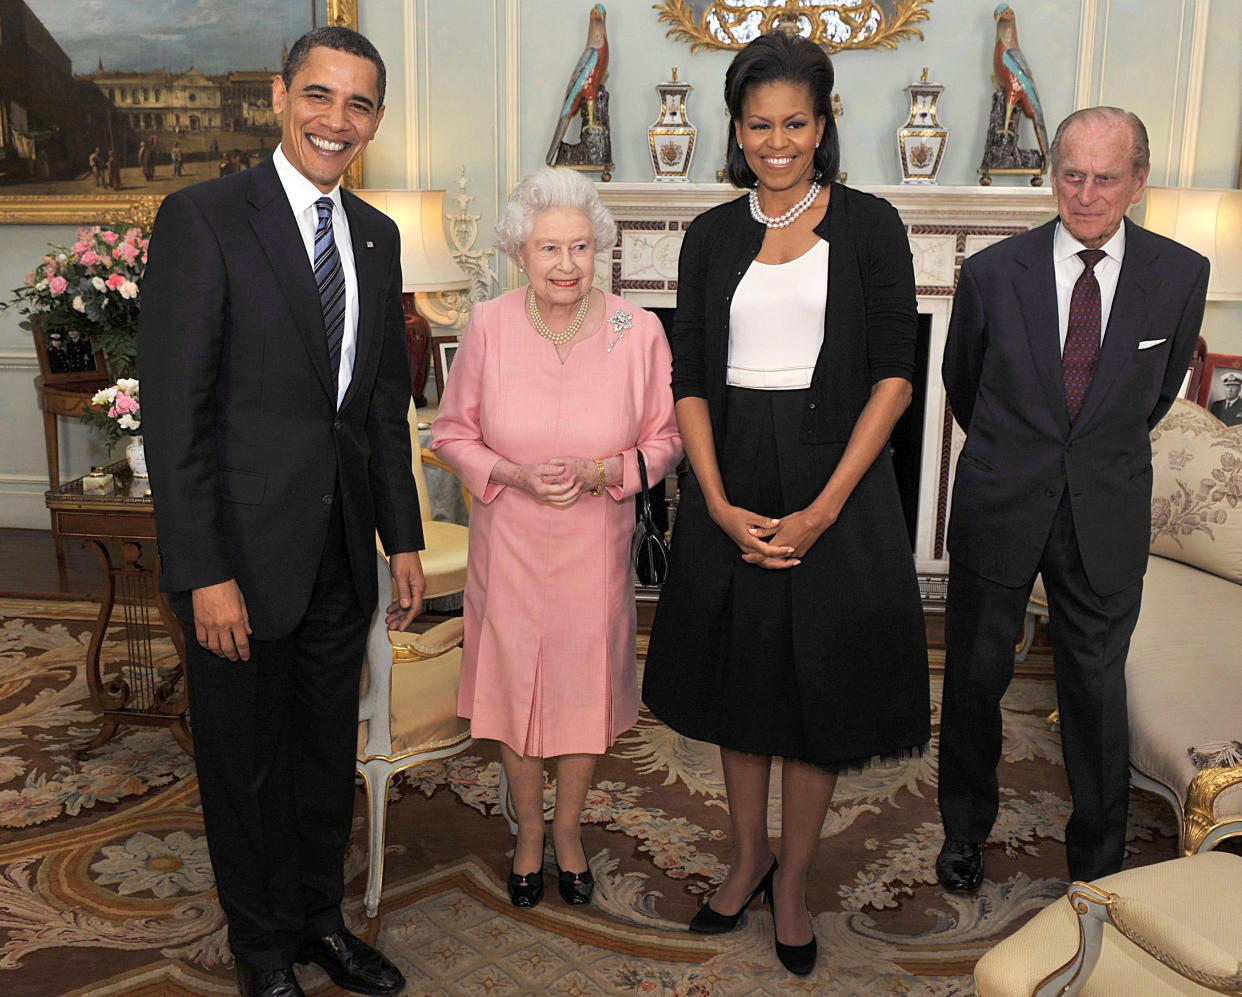 U.S. President Barack Obama (L) and his wife Michelle (2nd R) pose for a photograph with Britain's Queen Elizabeth and Prince Philip, the Duke of Edinburgh, at Buckingham Palace in London April 1, 2009. Obama said on Wednesday there was 